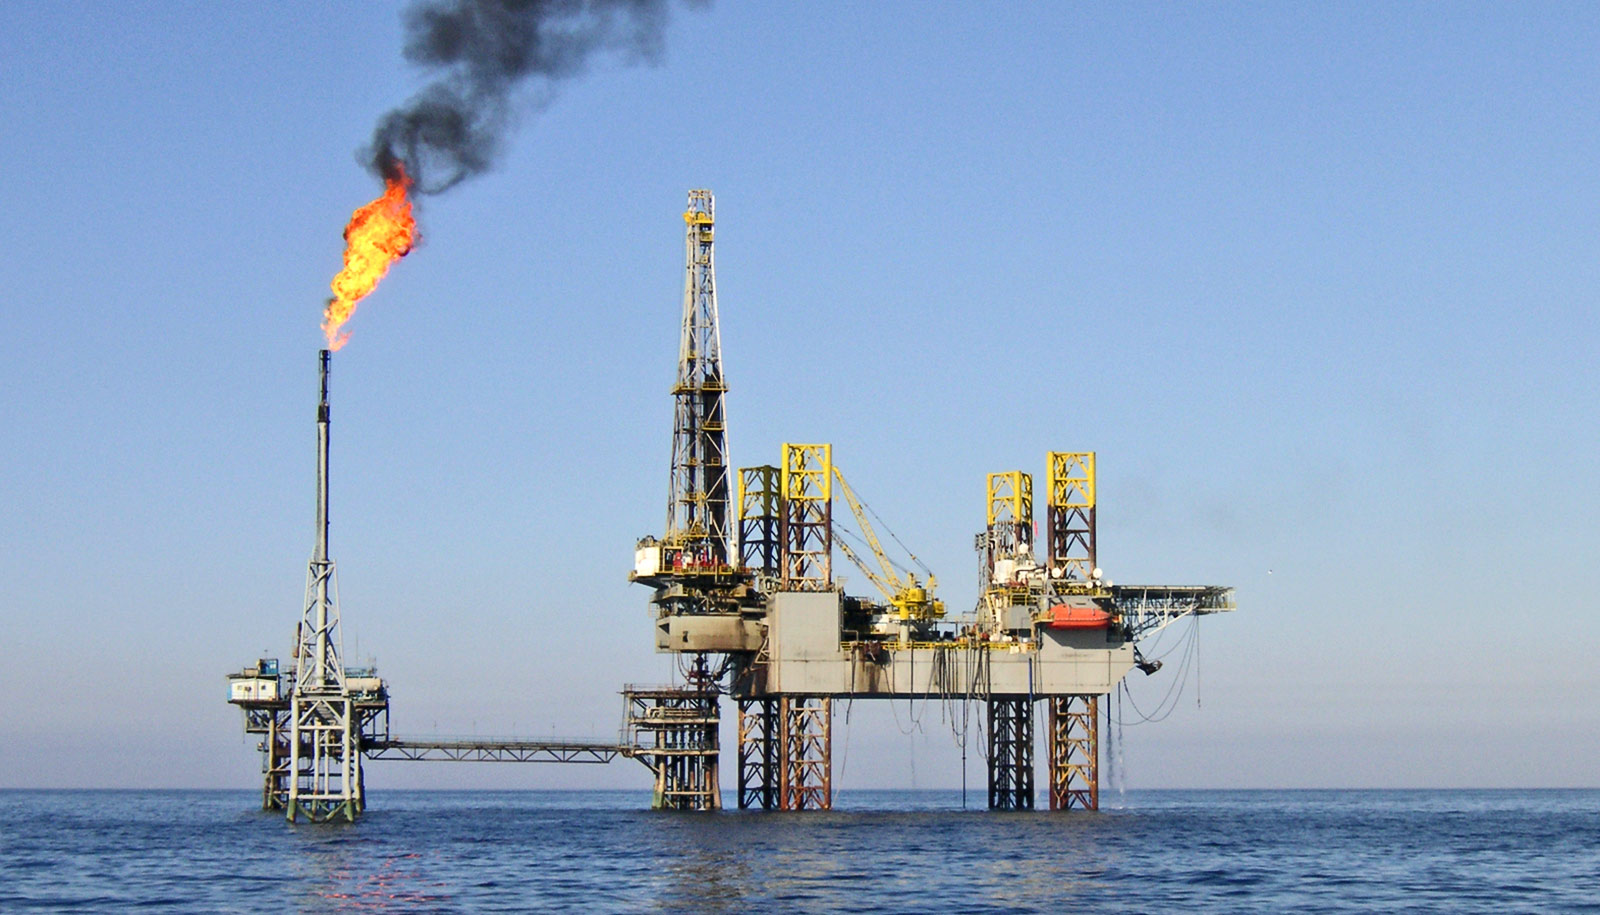 Offshore oil extraction with fugitive emissions